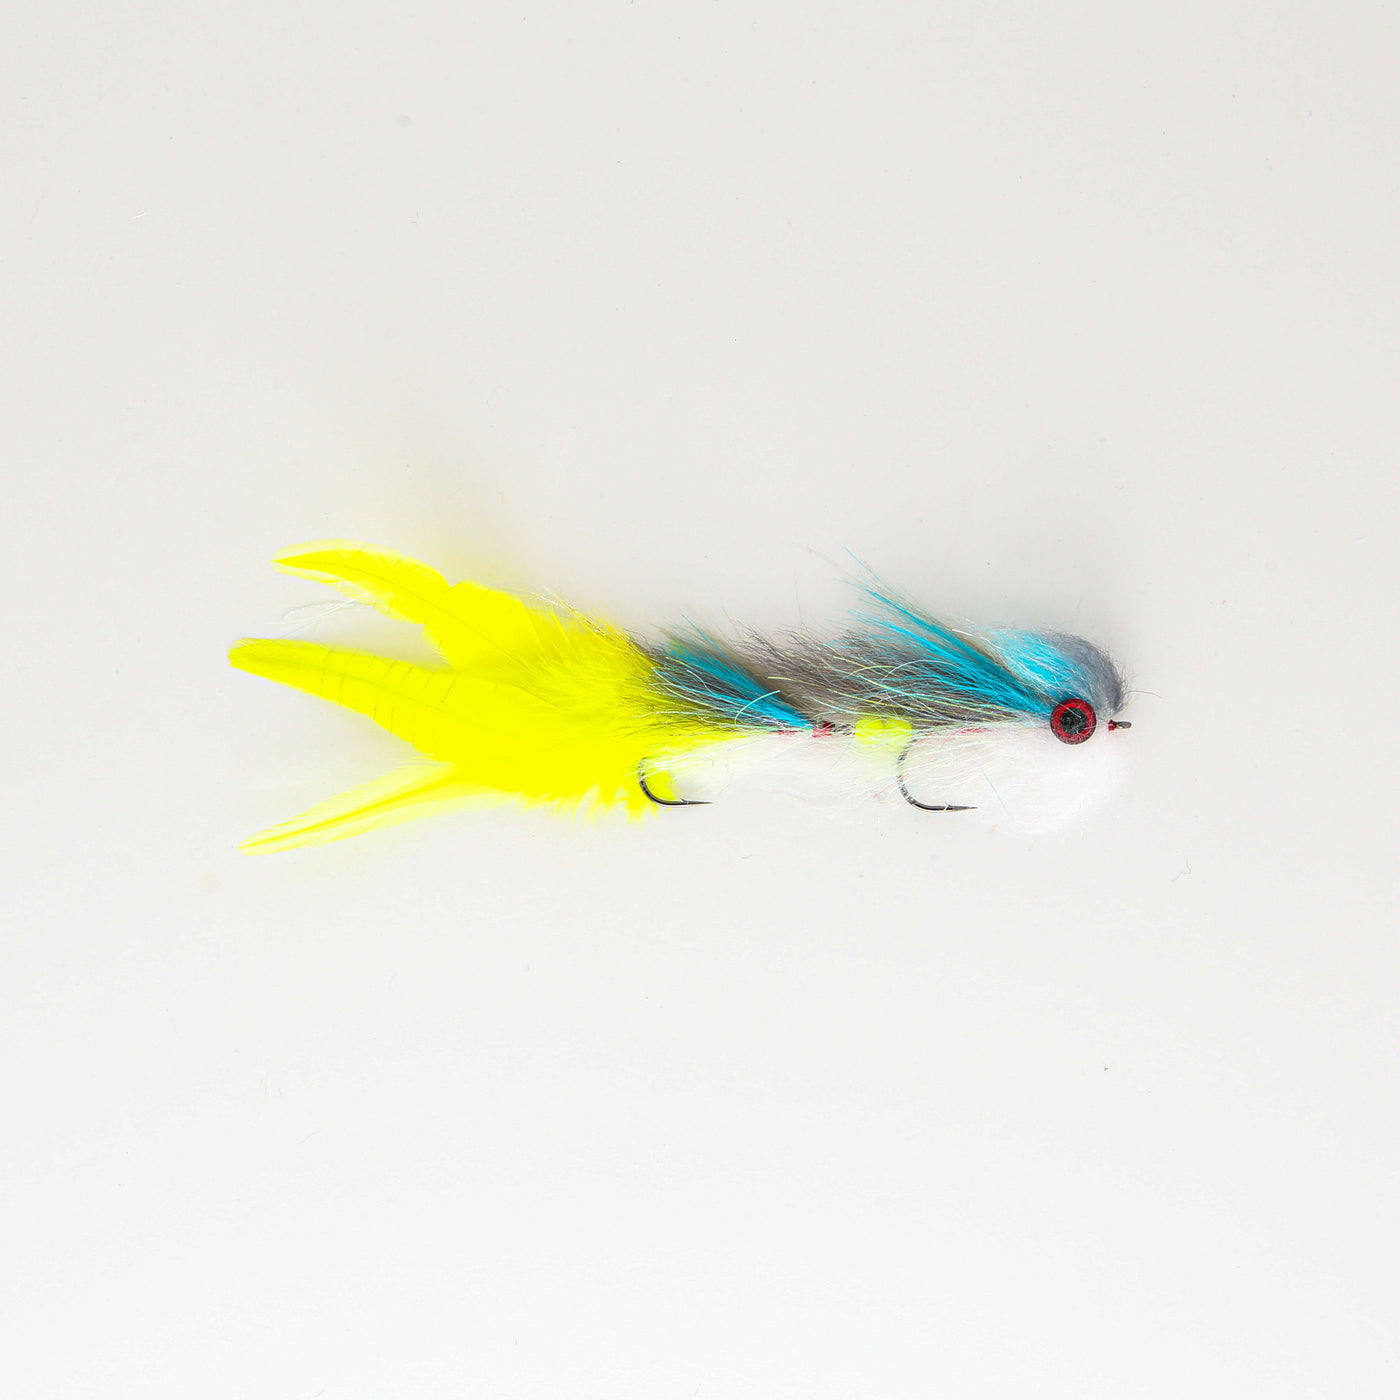 Adaptive Fly - The yard sale is better known as a muskie fly, but